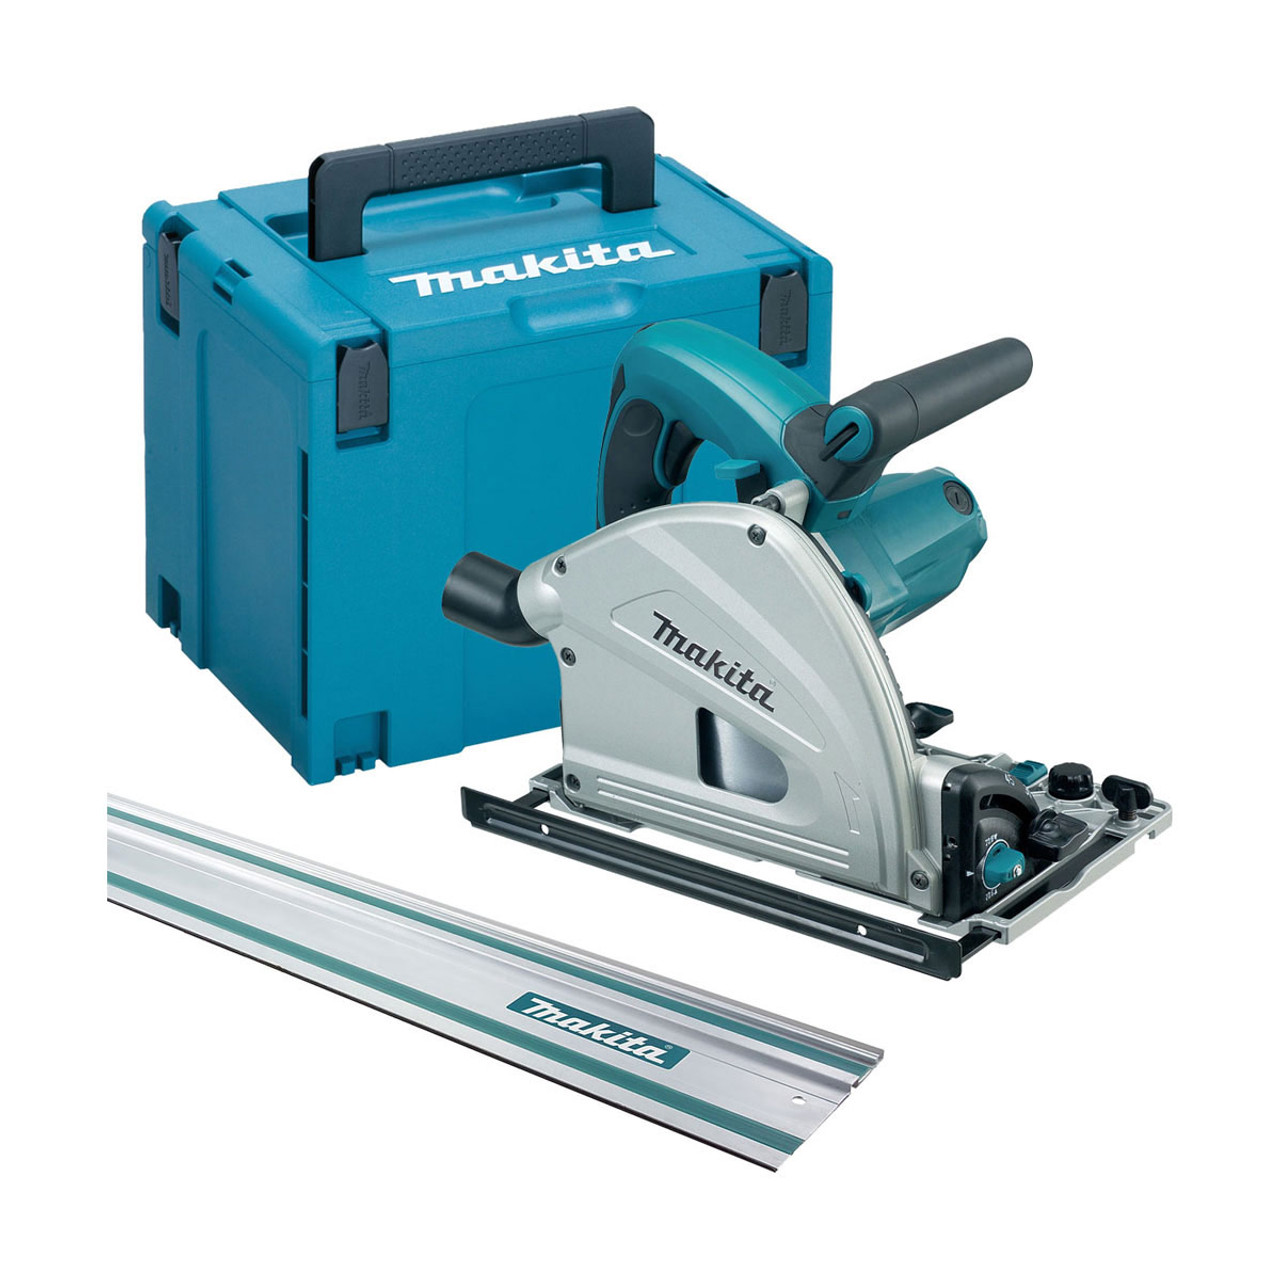 Makita 6-1/2 Plunge Circular Saw With Rail SP6000J1 From